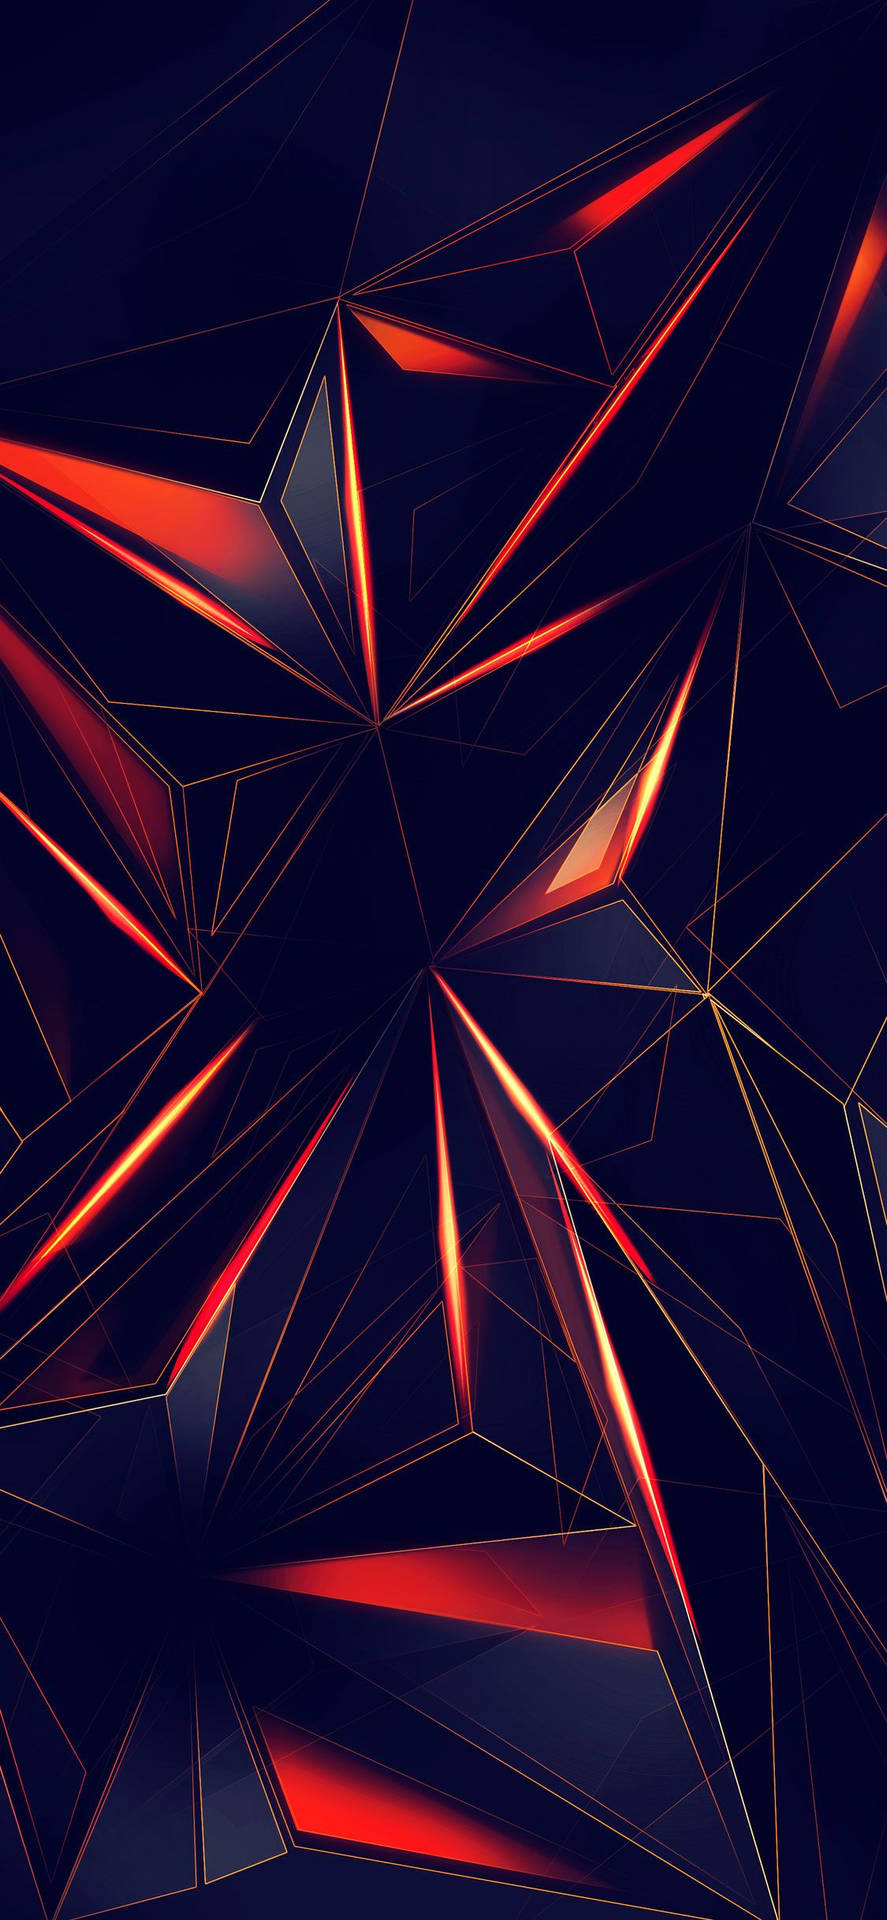 Striking Black And Red Diamond Pattern On An Iphone 11 Background